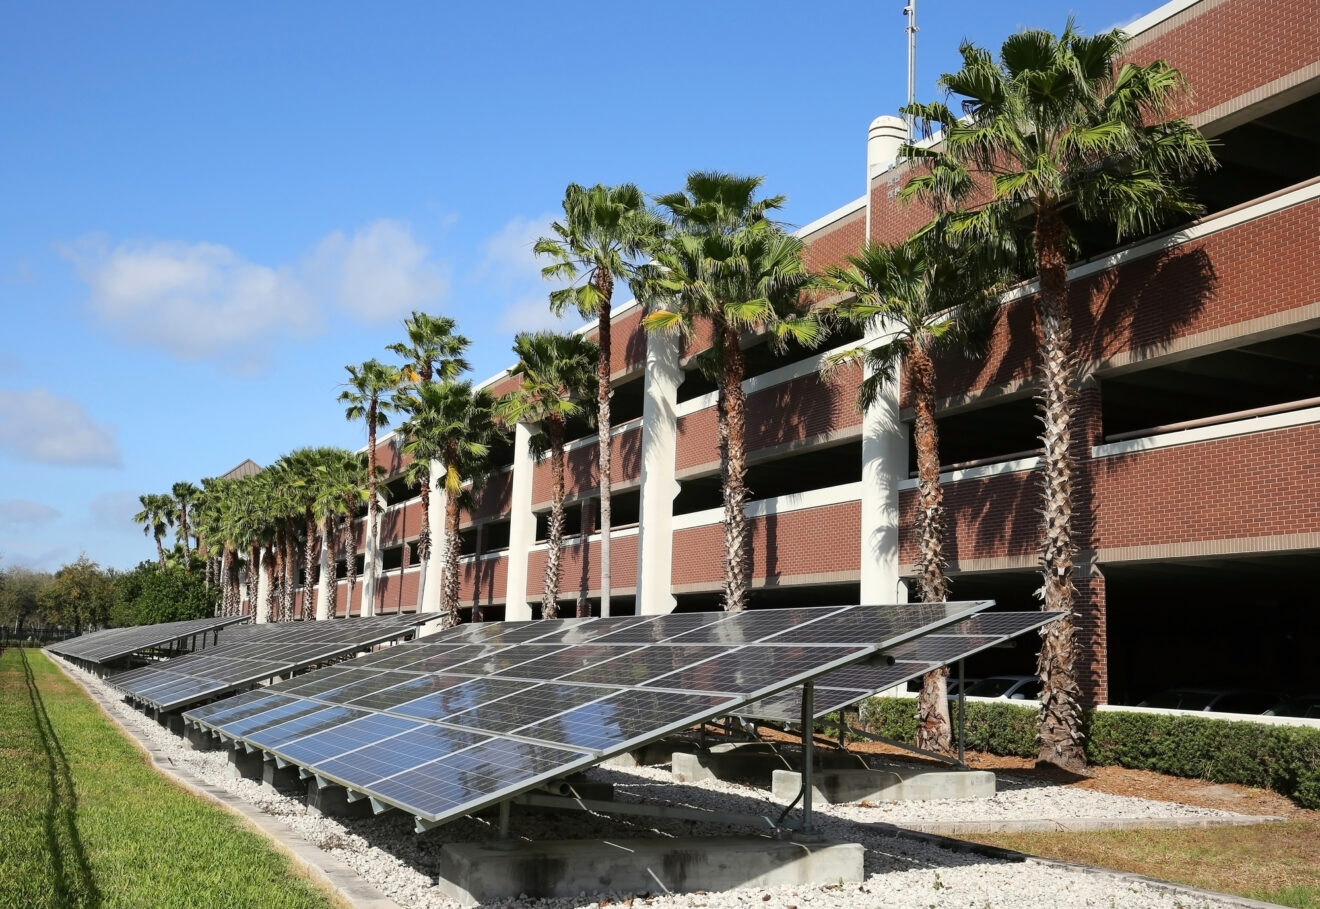 Long line of solar panels converting the sun's rays into electricity in front of a parking garage.